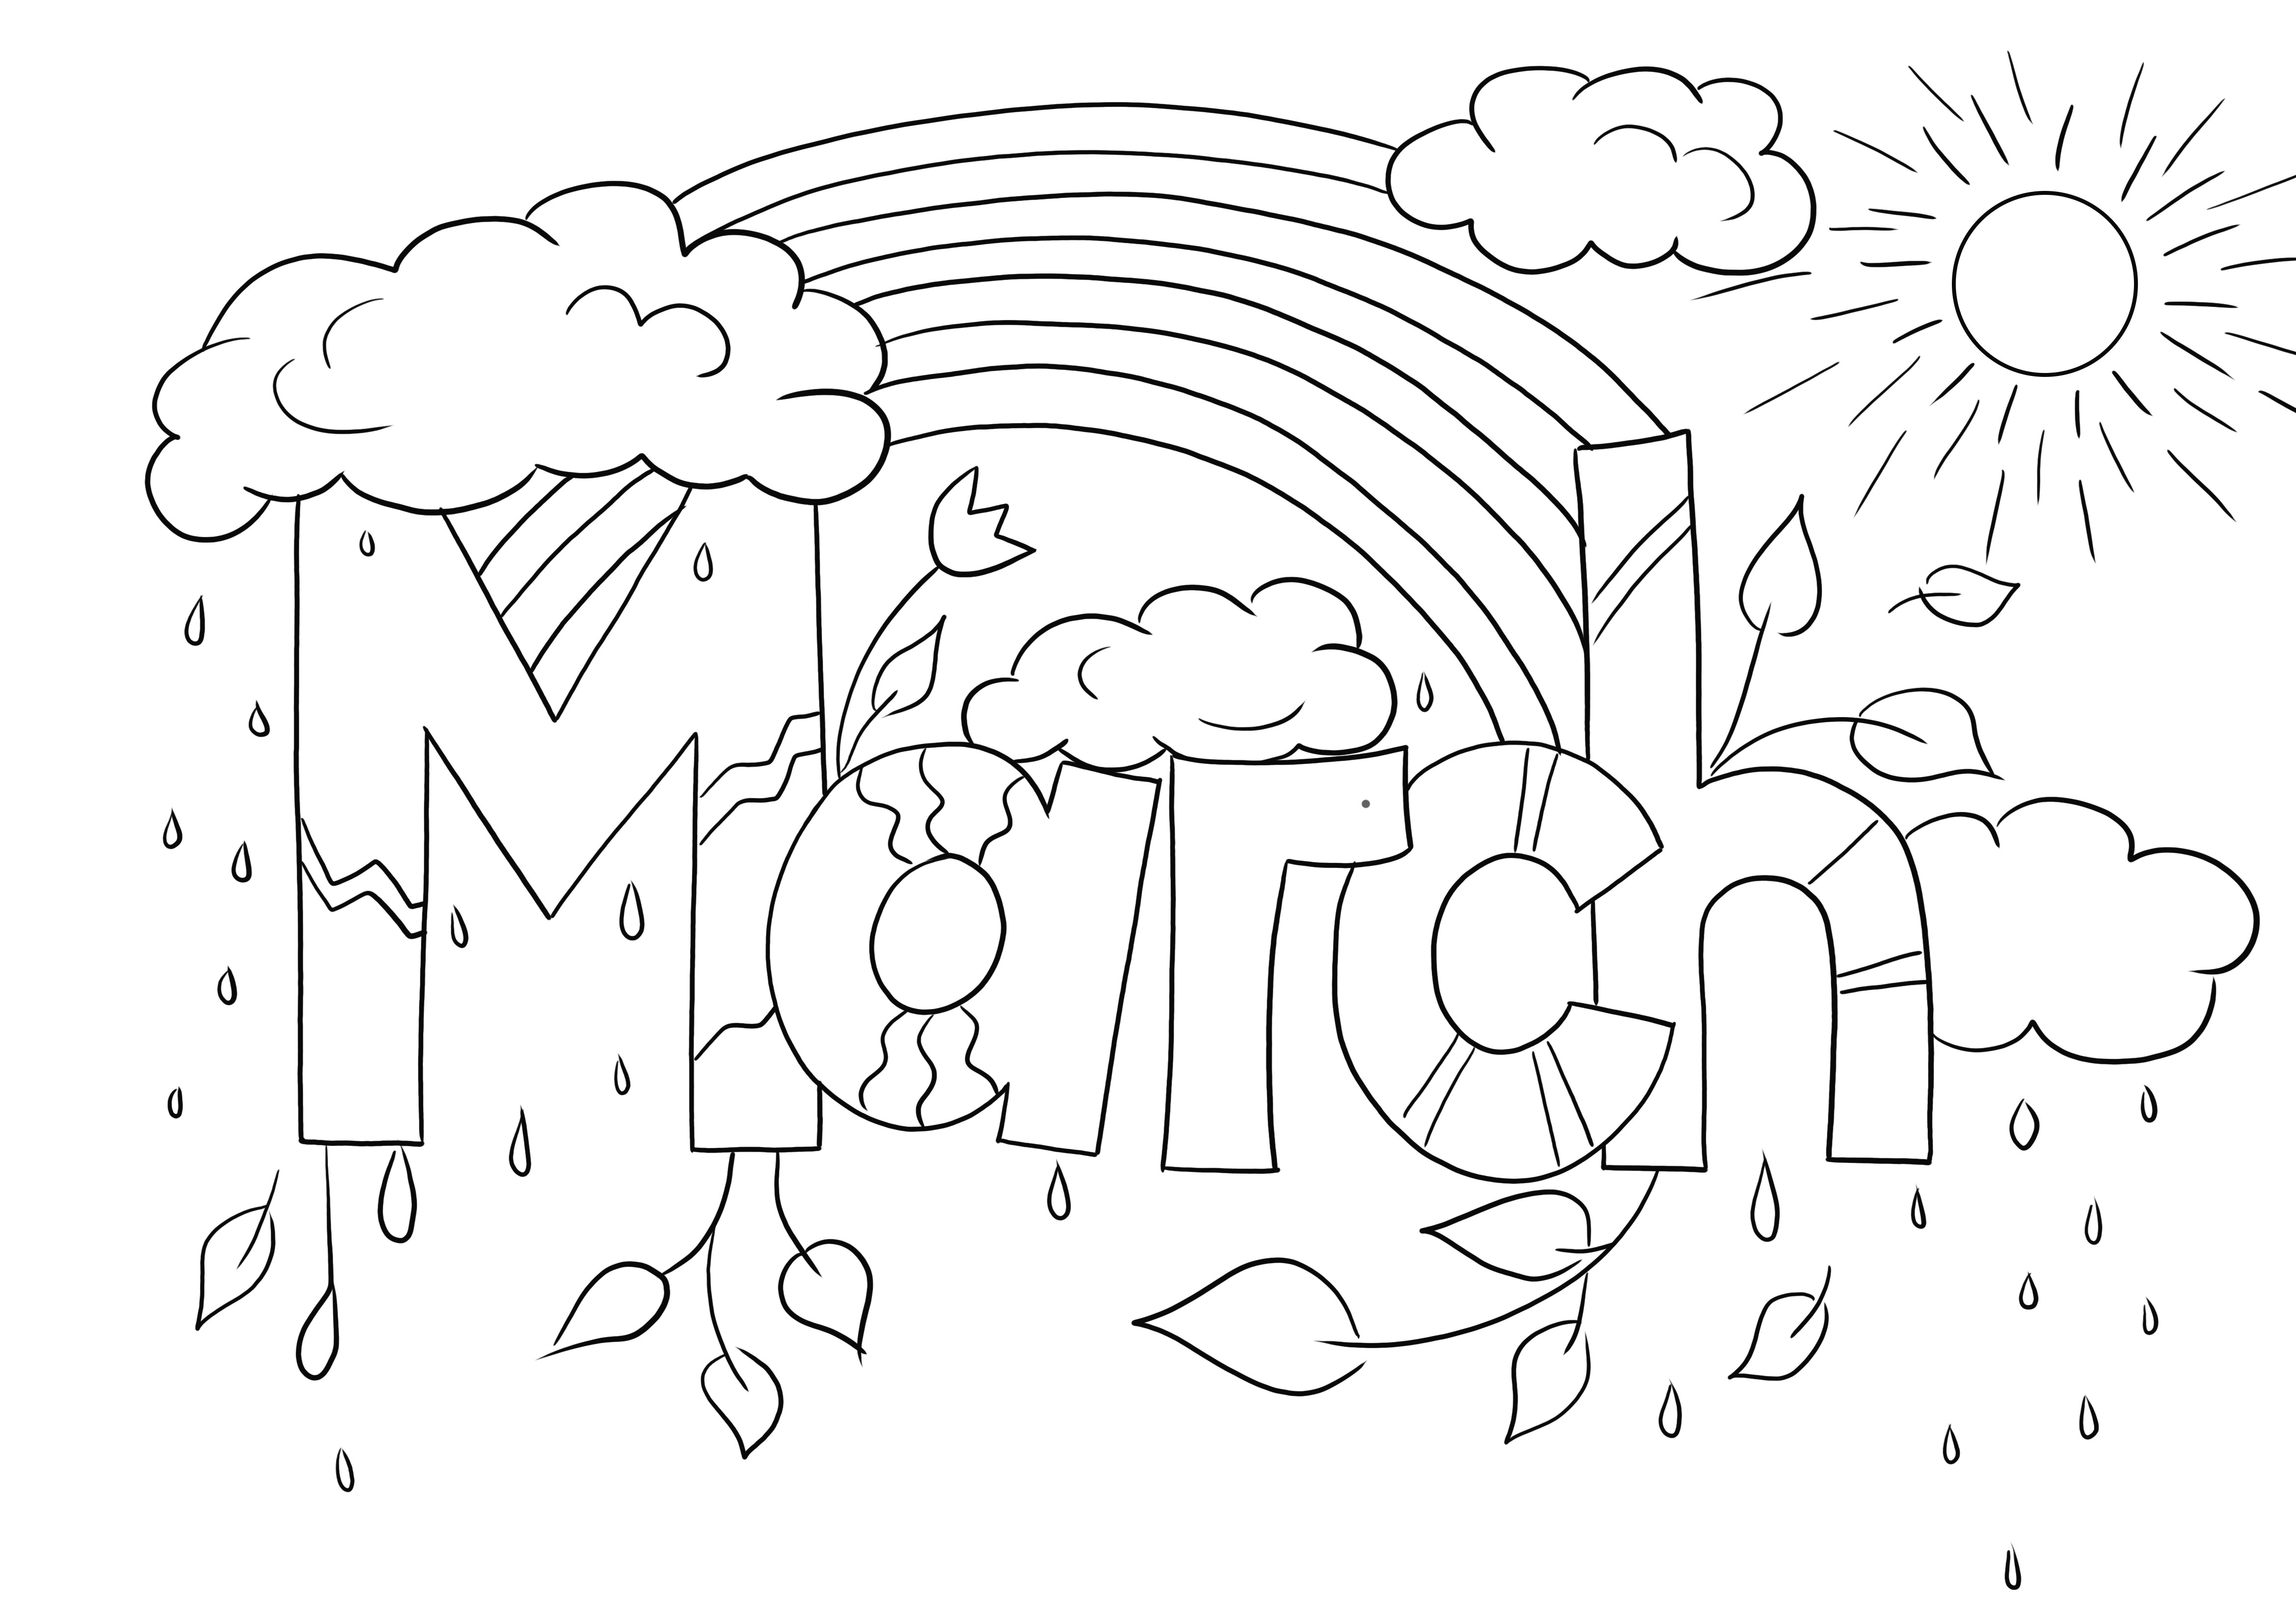 March month easy to download or print sheet to color for kids of all ages